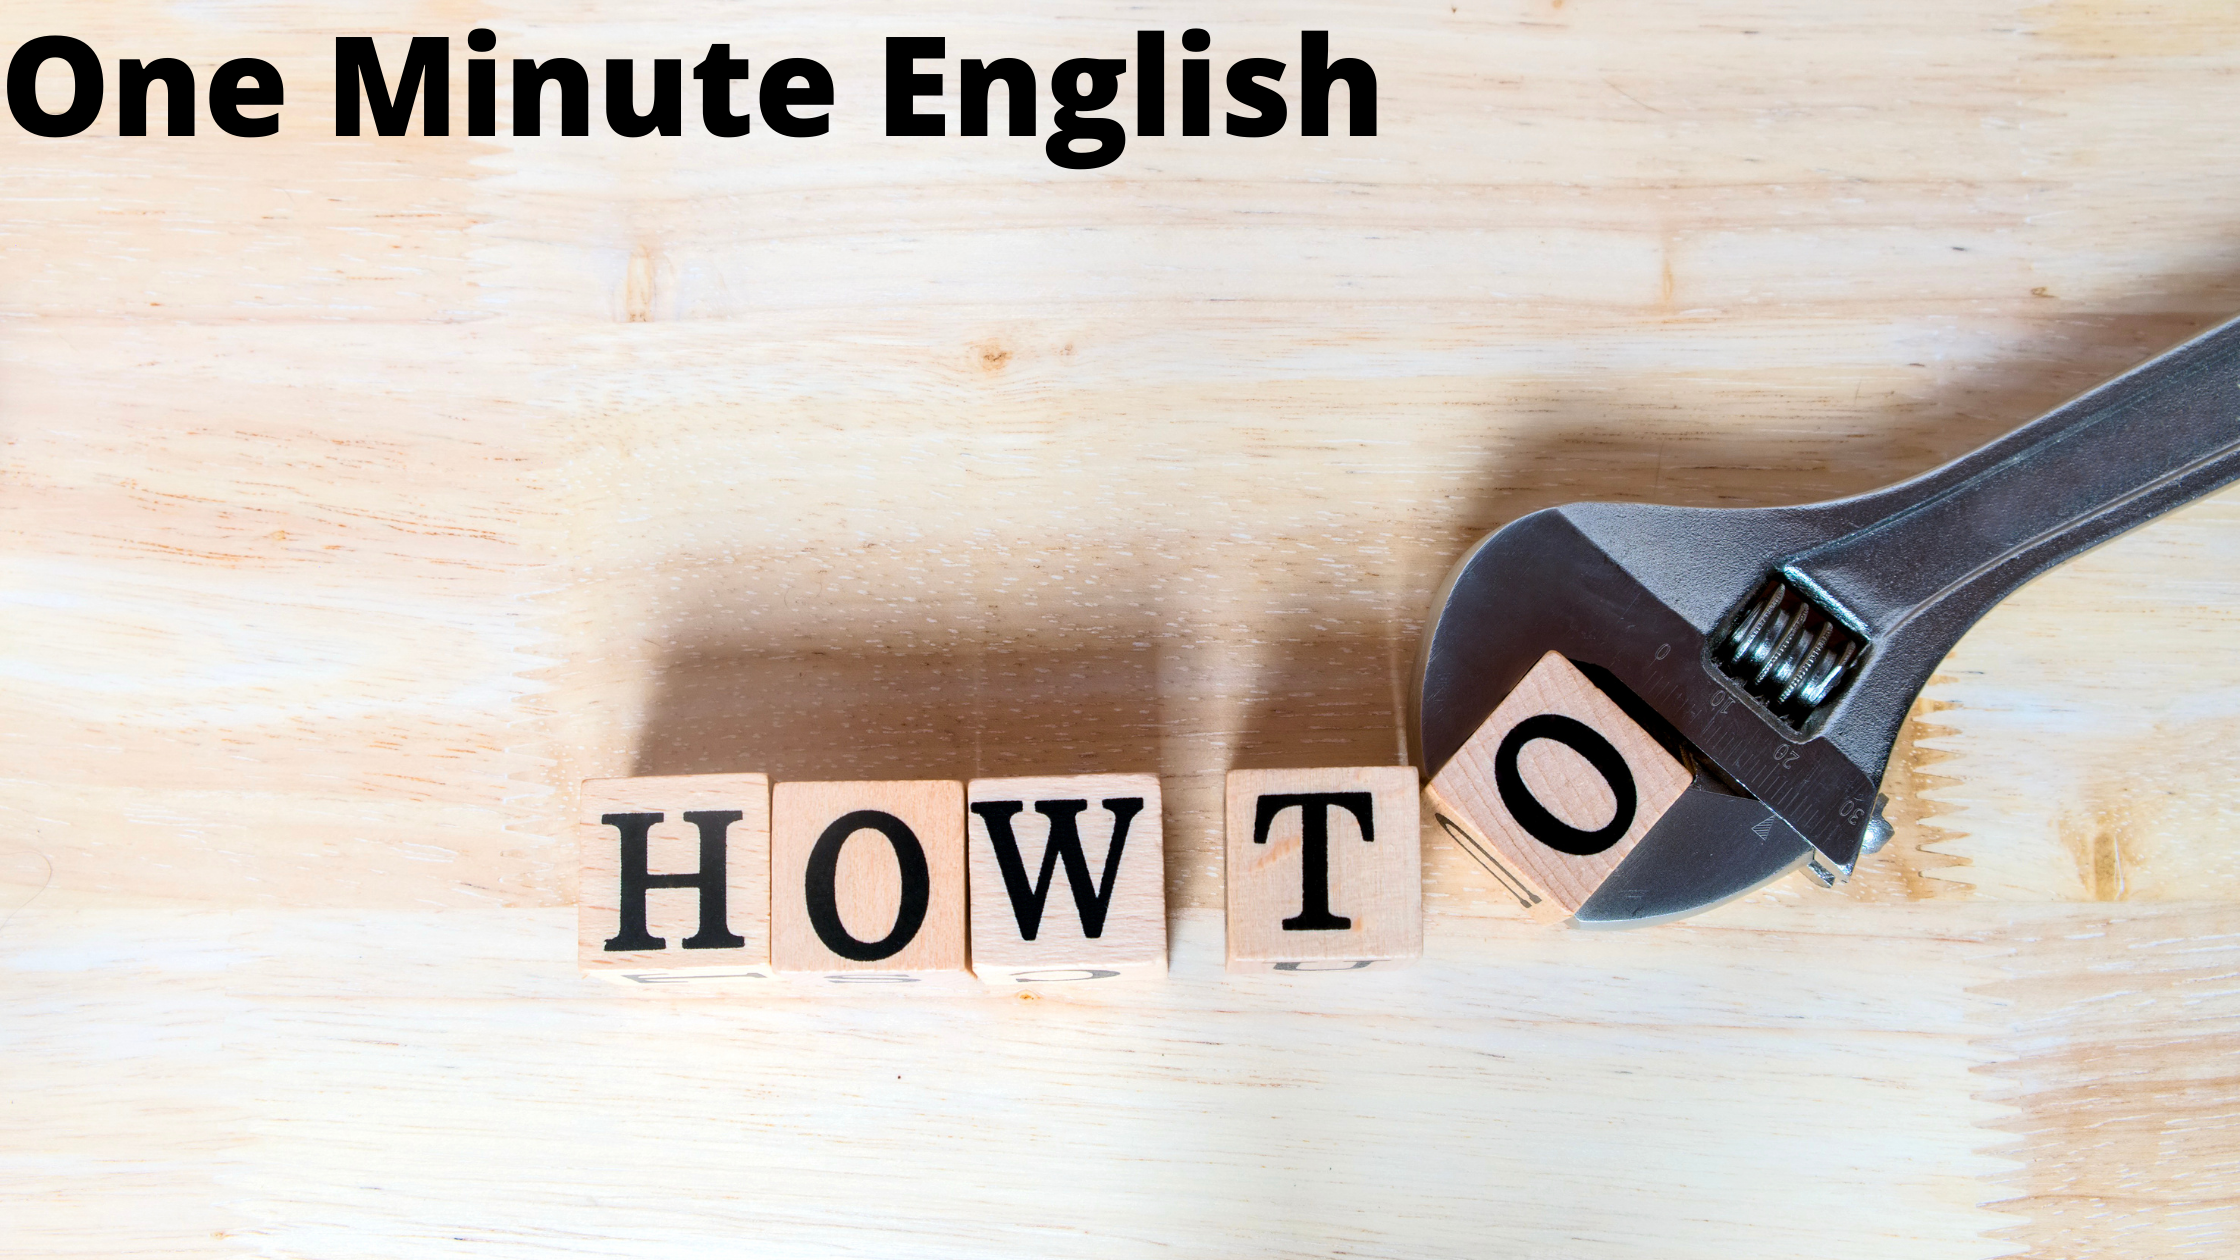 What is the plural of how-to? - One Minute English